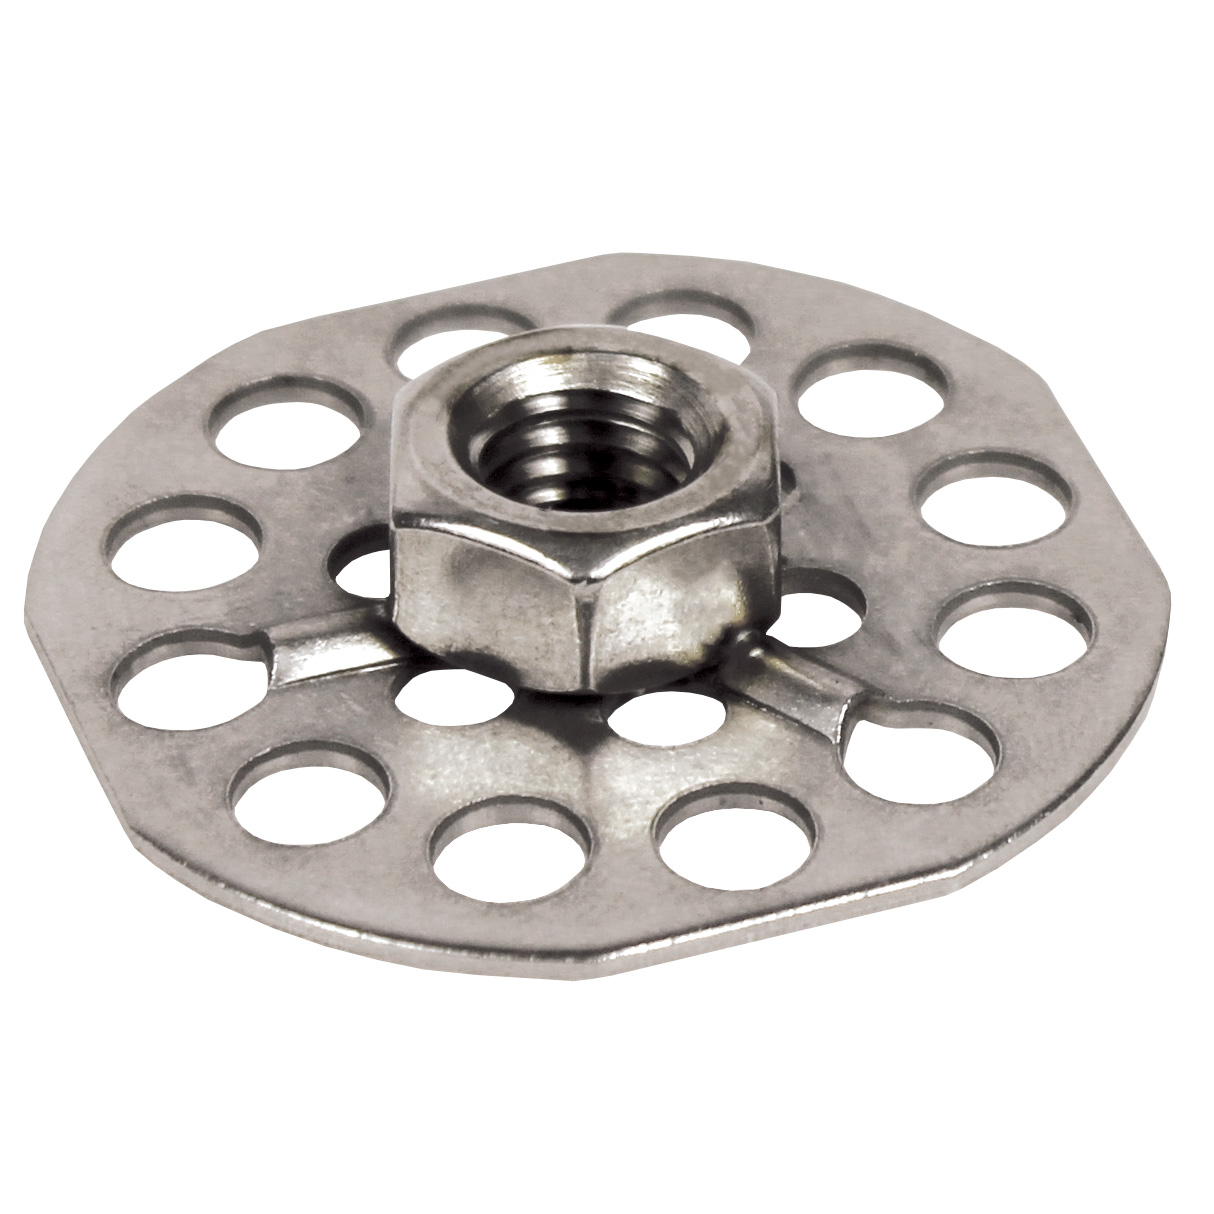 Masterplate® glueable insert Ø38 - Cylindrical Ø38 with tapped insert - Stainless steel - 